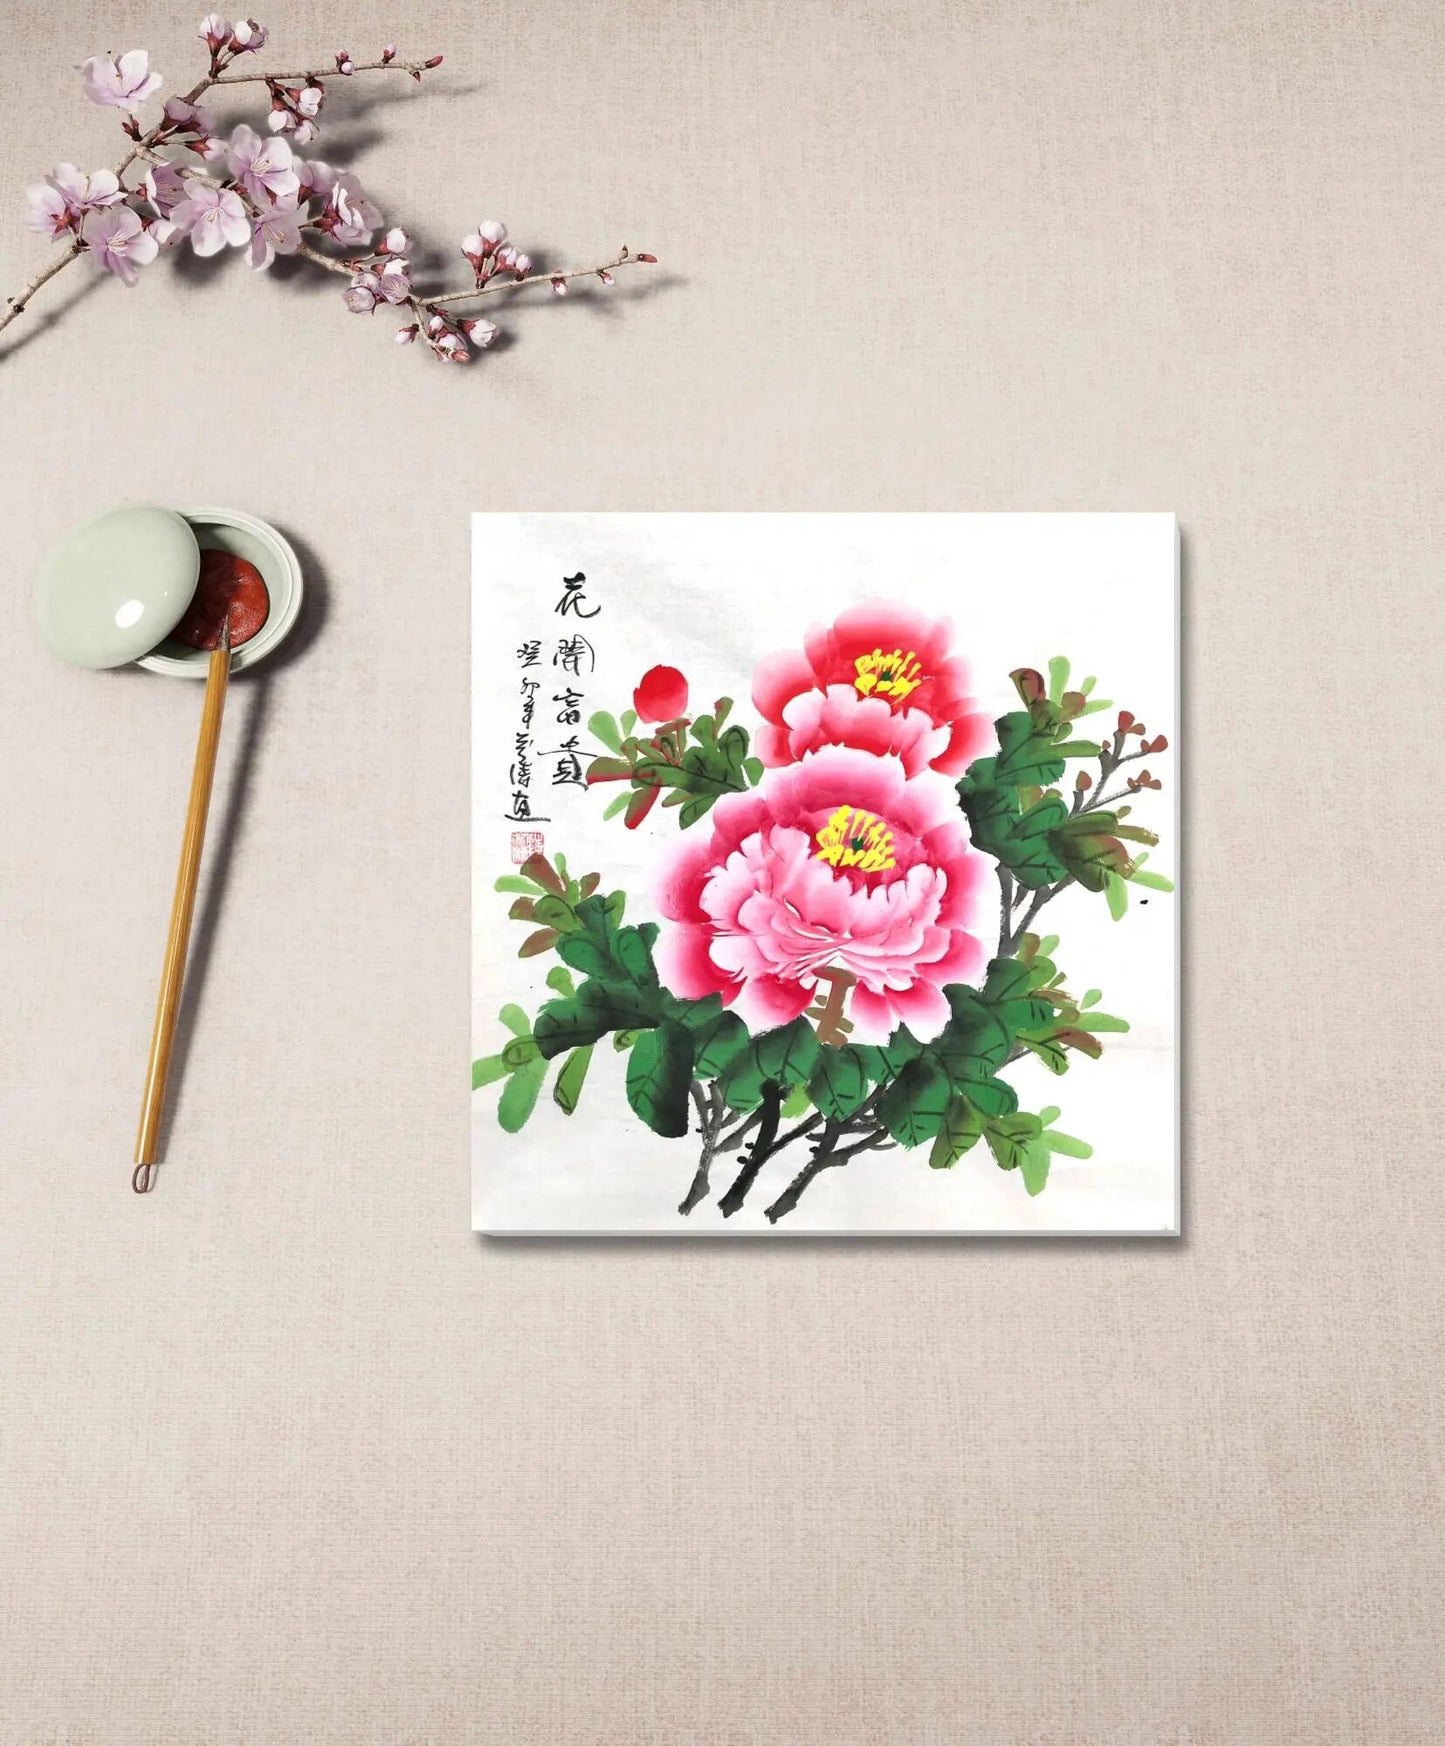 Chinese painting-Peony flower. Wall decoration,Collectible painting.glory, wealth and prosperity.